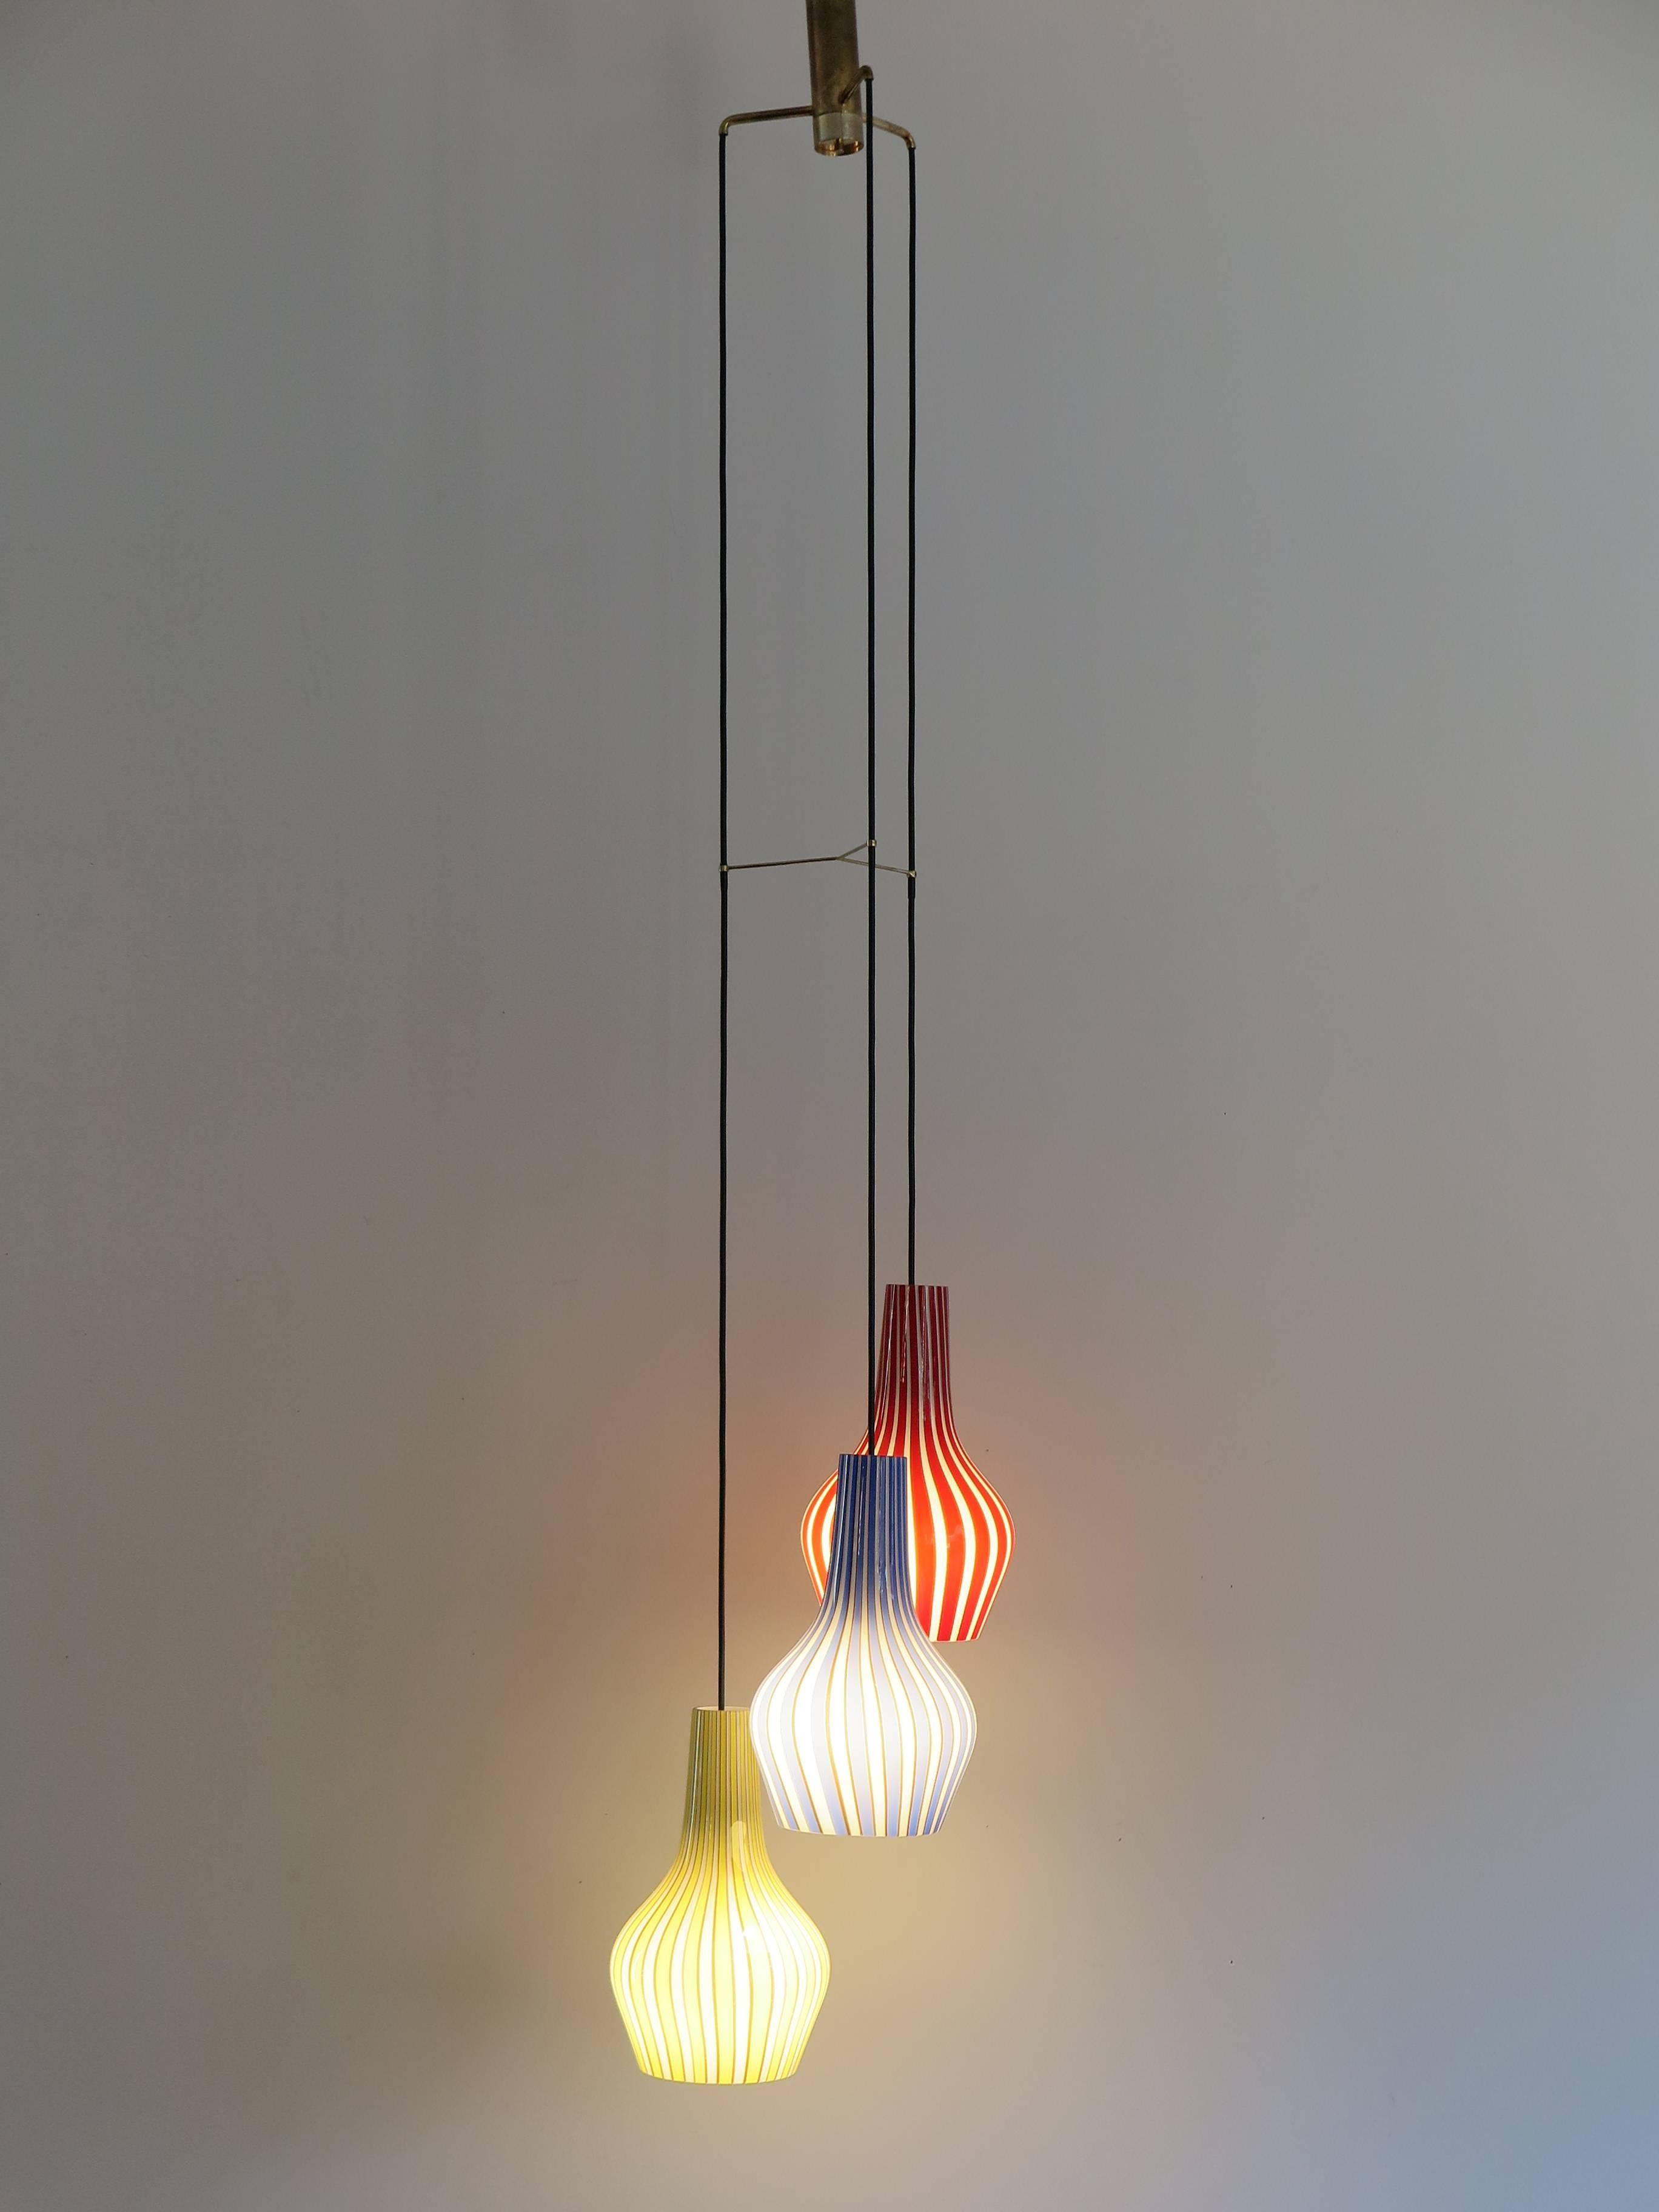 1950s, amazing Italian glass pendant lamp designed by Flavio Poli for Seguso Vetri d'Arte ‘Art glass’ with lined striped glass diffusers and with inner white casing, brass details.
29th Venice Biennale.
Single glass diffuser size: height 29 cm,